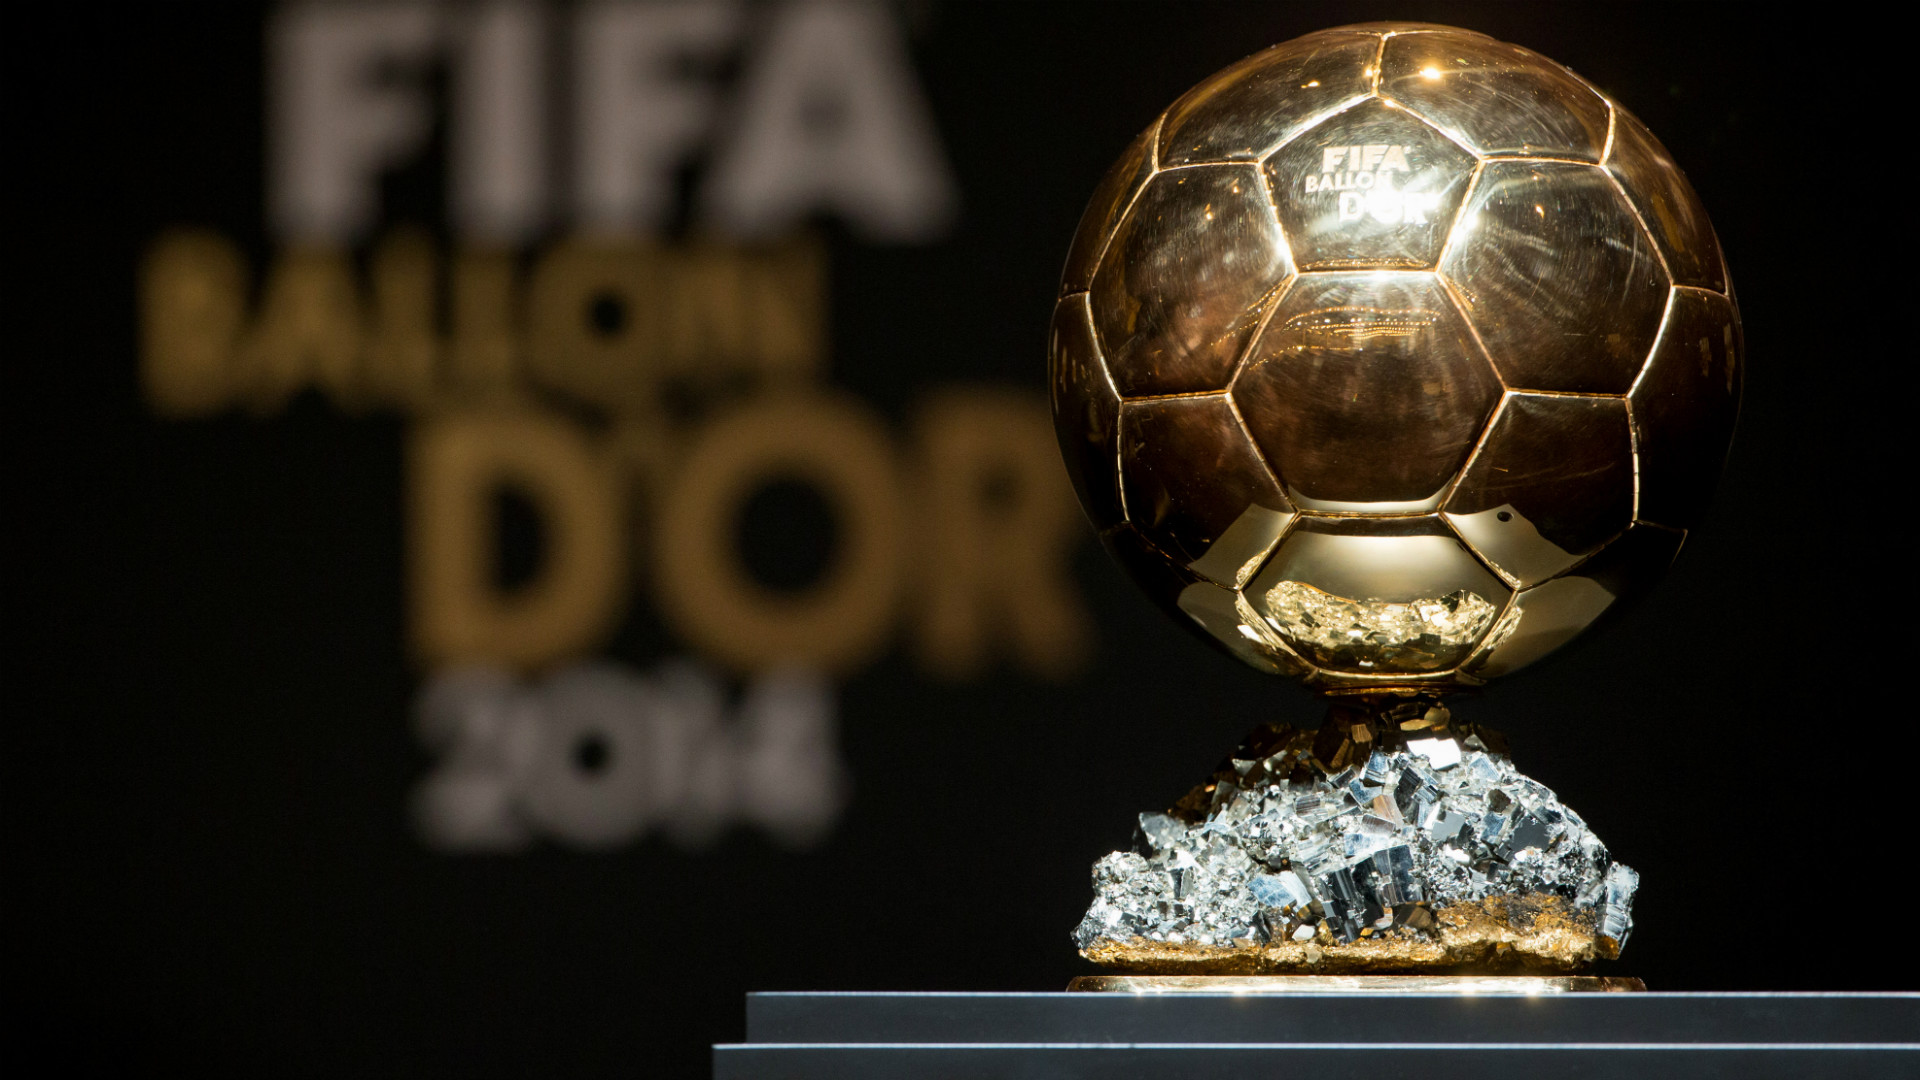 How to watch Ballon d'Or 2021 Awards online